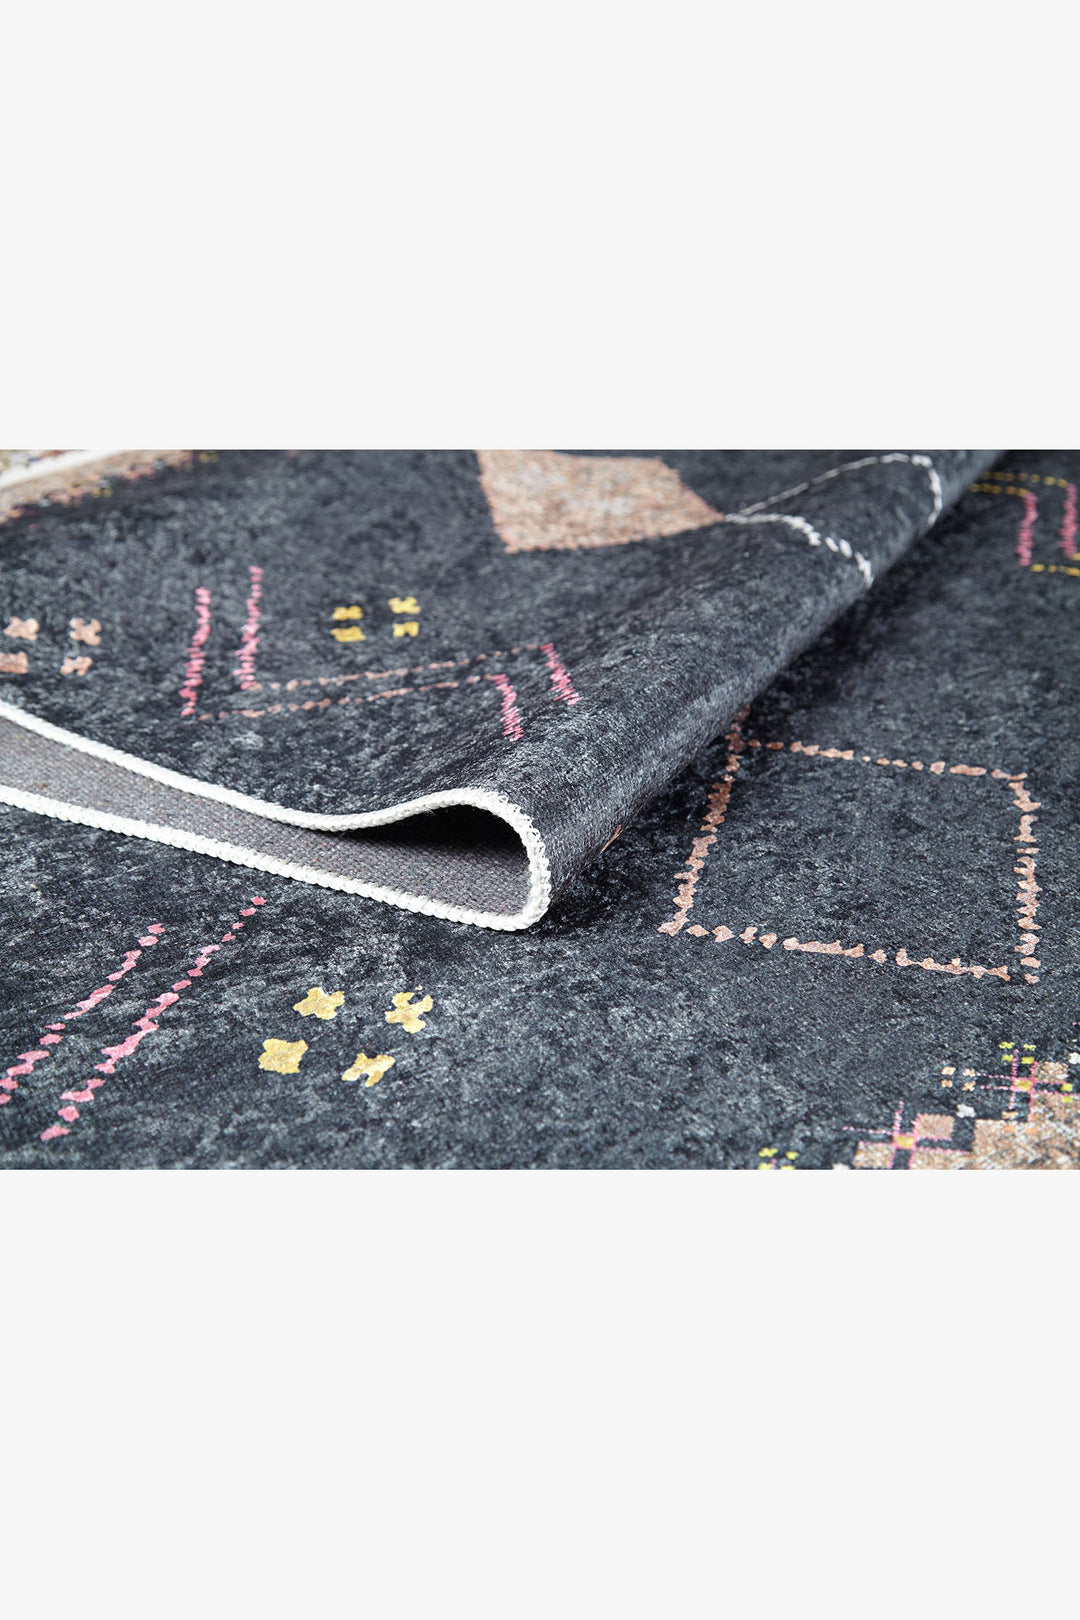 machine-washable-area-rug-Braided-Tassel-Collection-Gray-Anthracite-JR5106